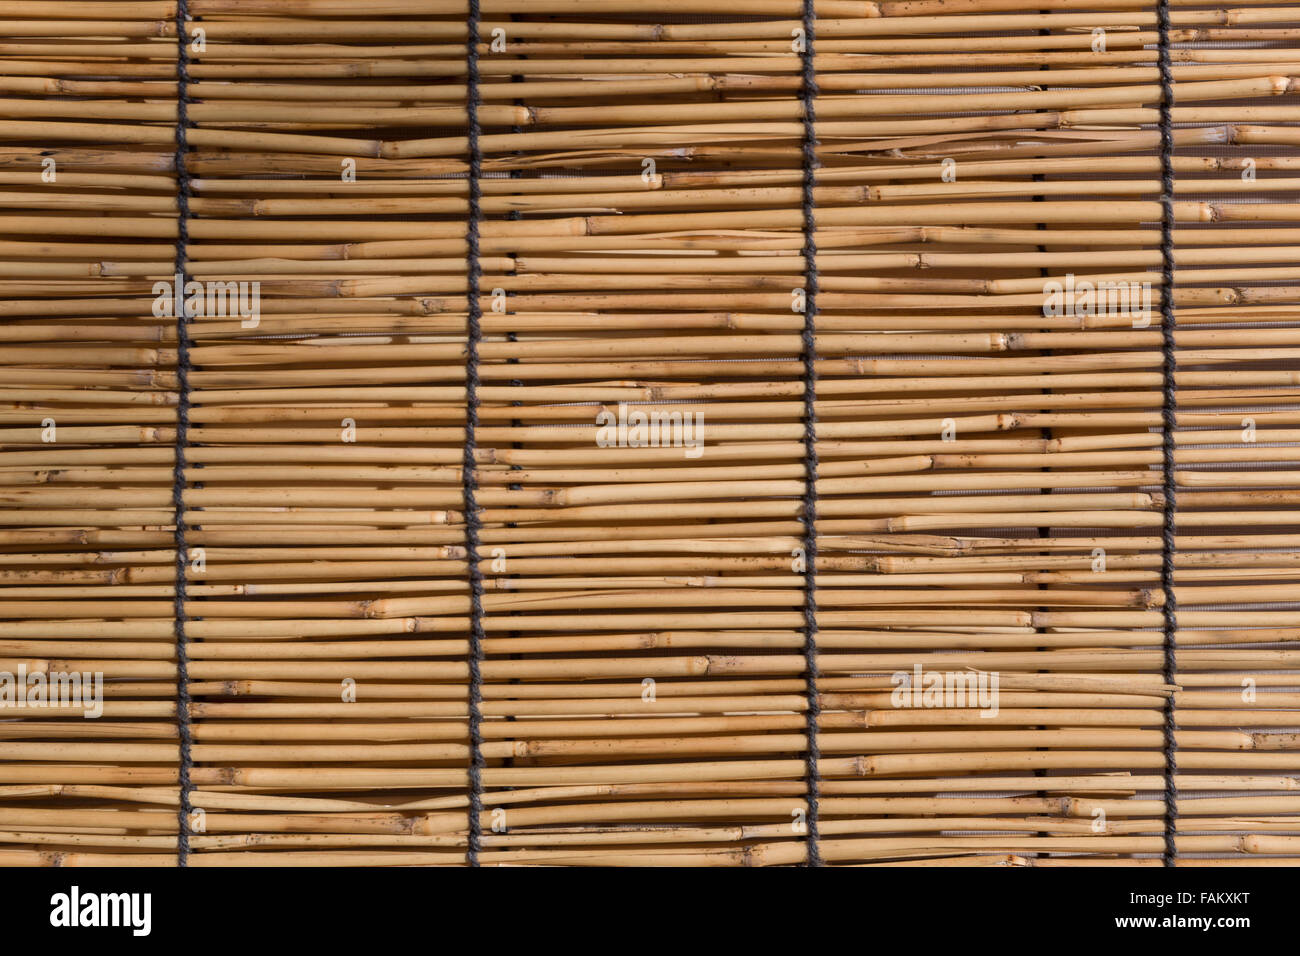 Curtain texture background made from bamboo wood. Stock Photo